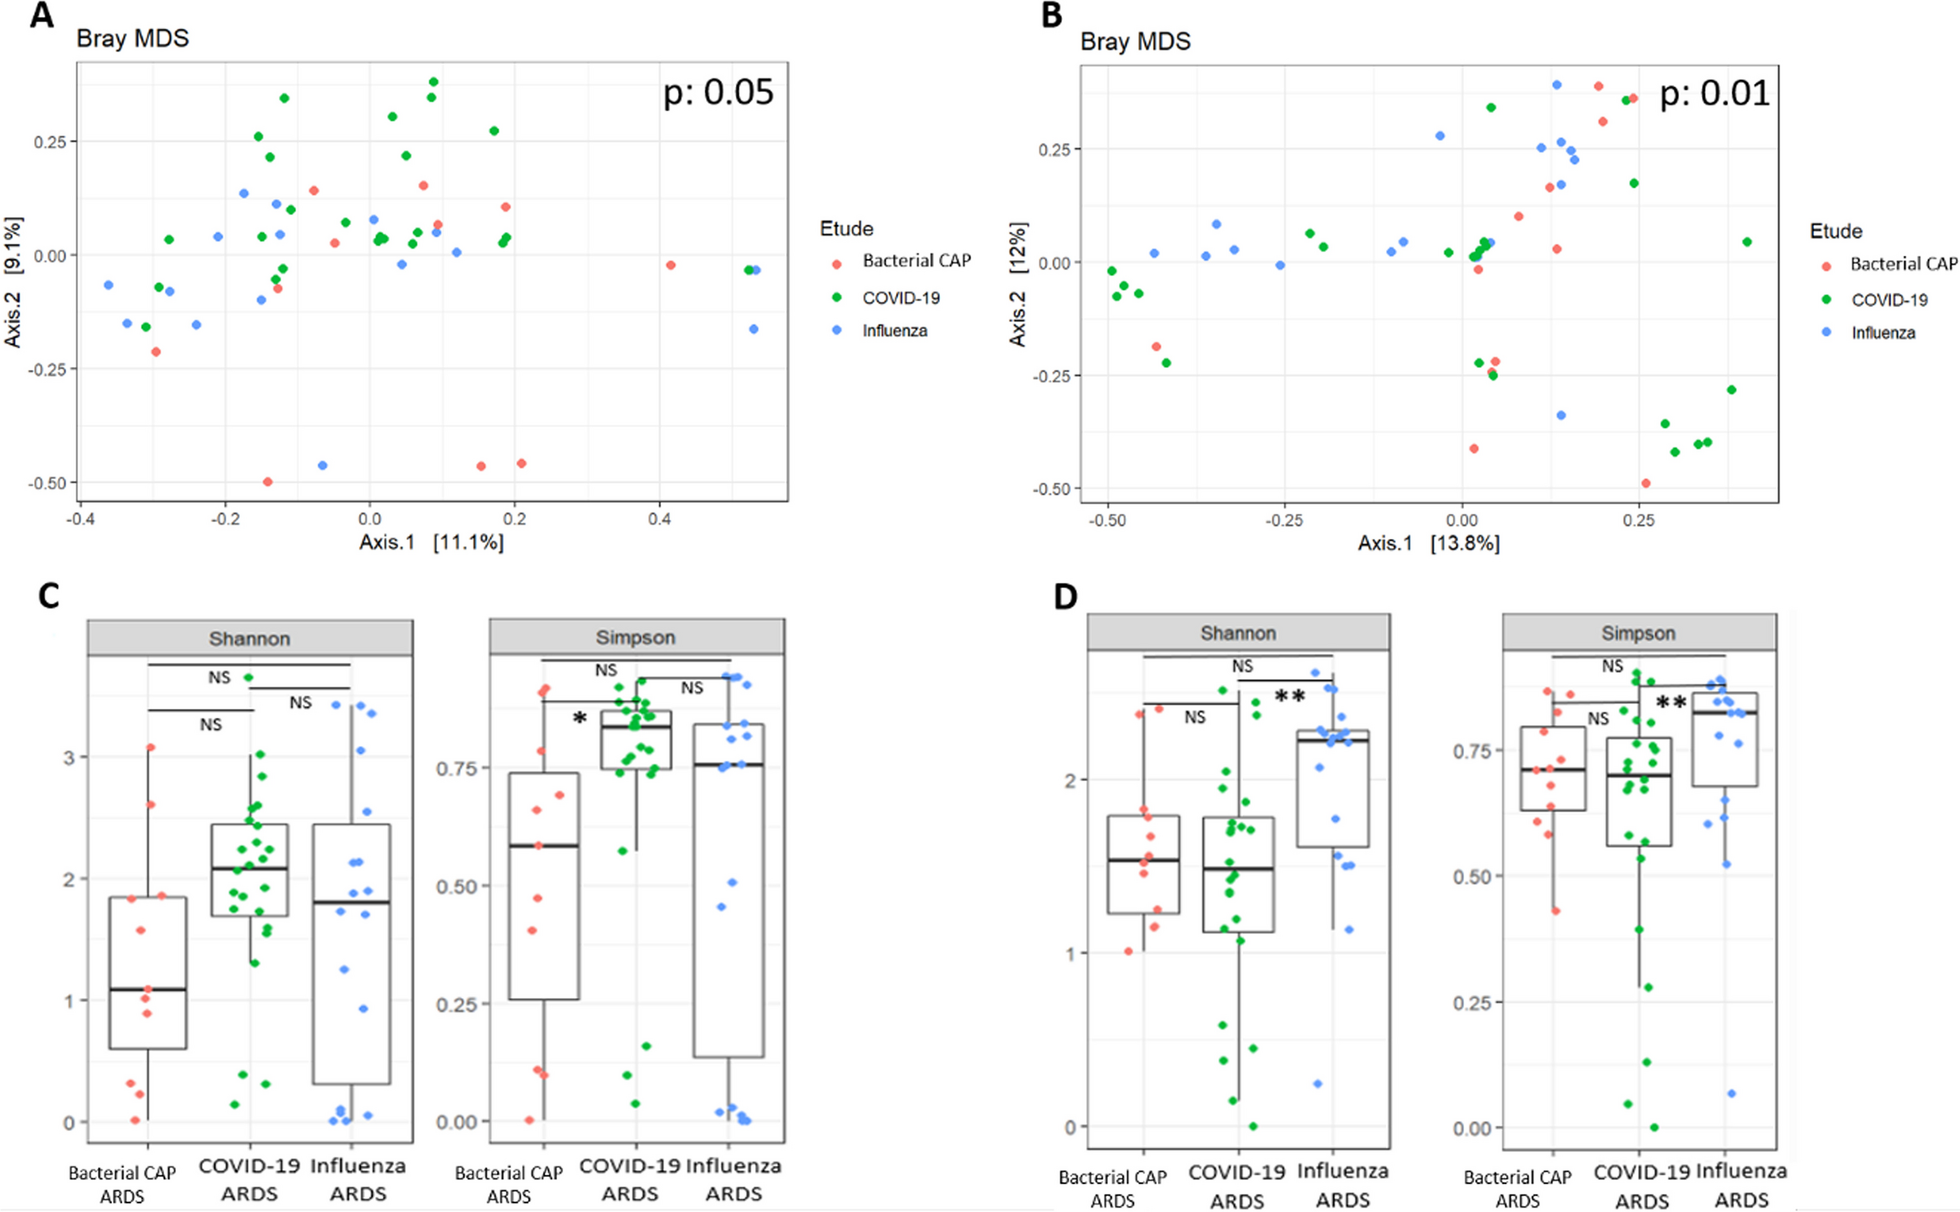 Lower airway microbiota compositions differ between influenza, COVID-19 and bacteria-related acute respiratory distress syndromes